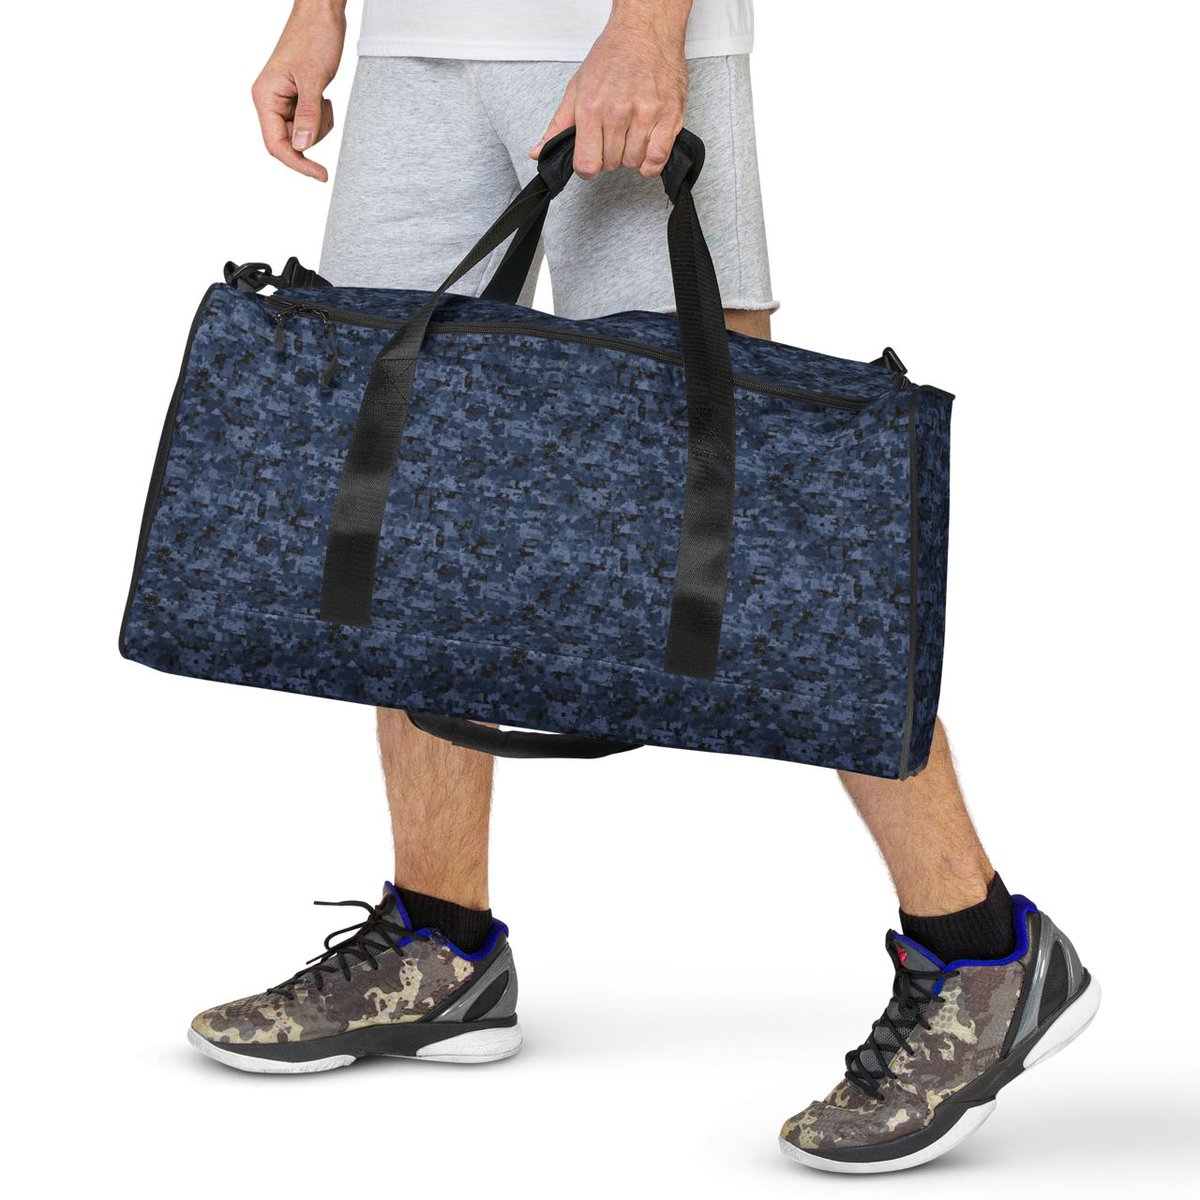 $COPE duffle bag, perfect for your weekend getaways.

Basedcope.store